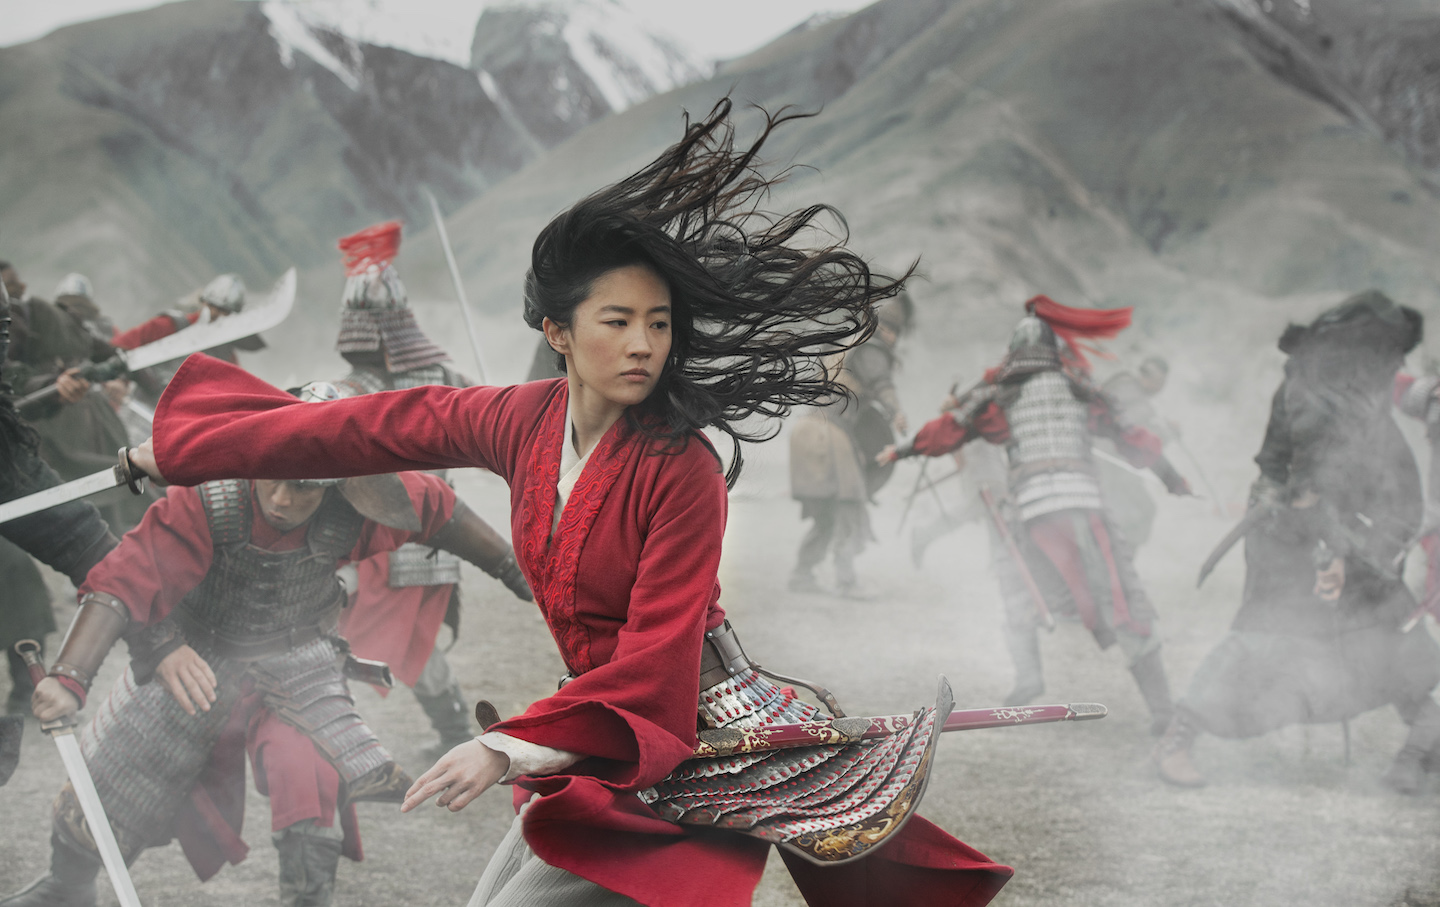 The Political Use and Misuse of ‘Mulan’